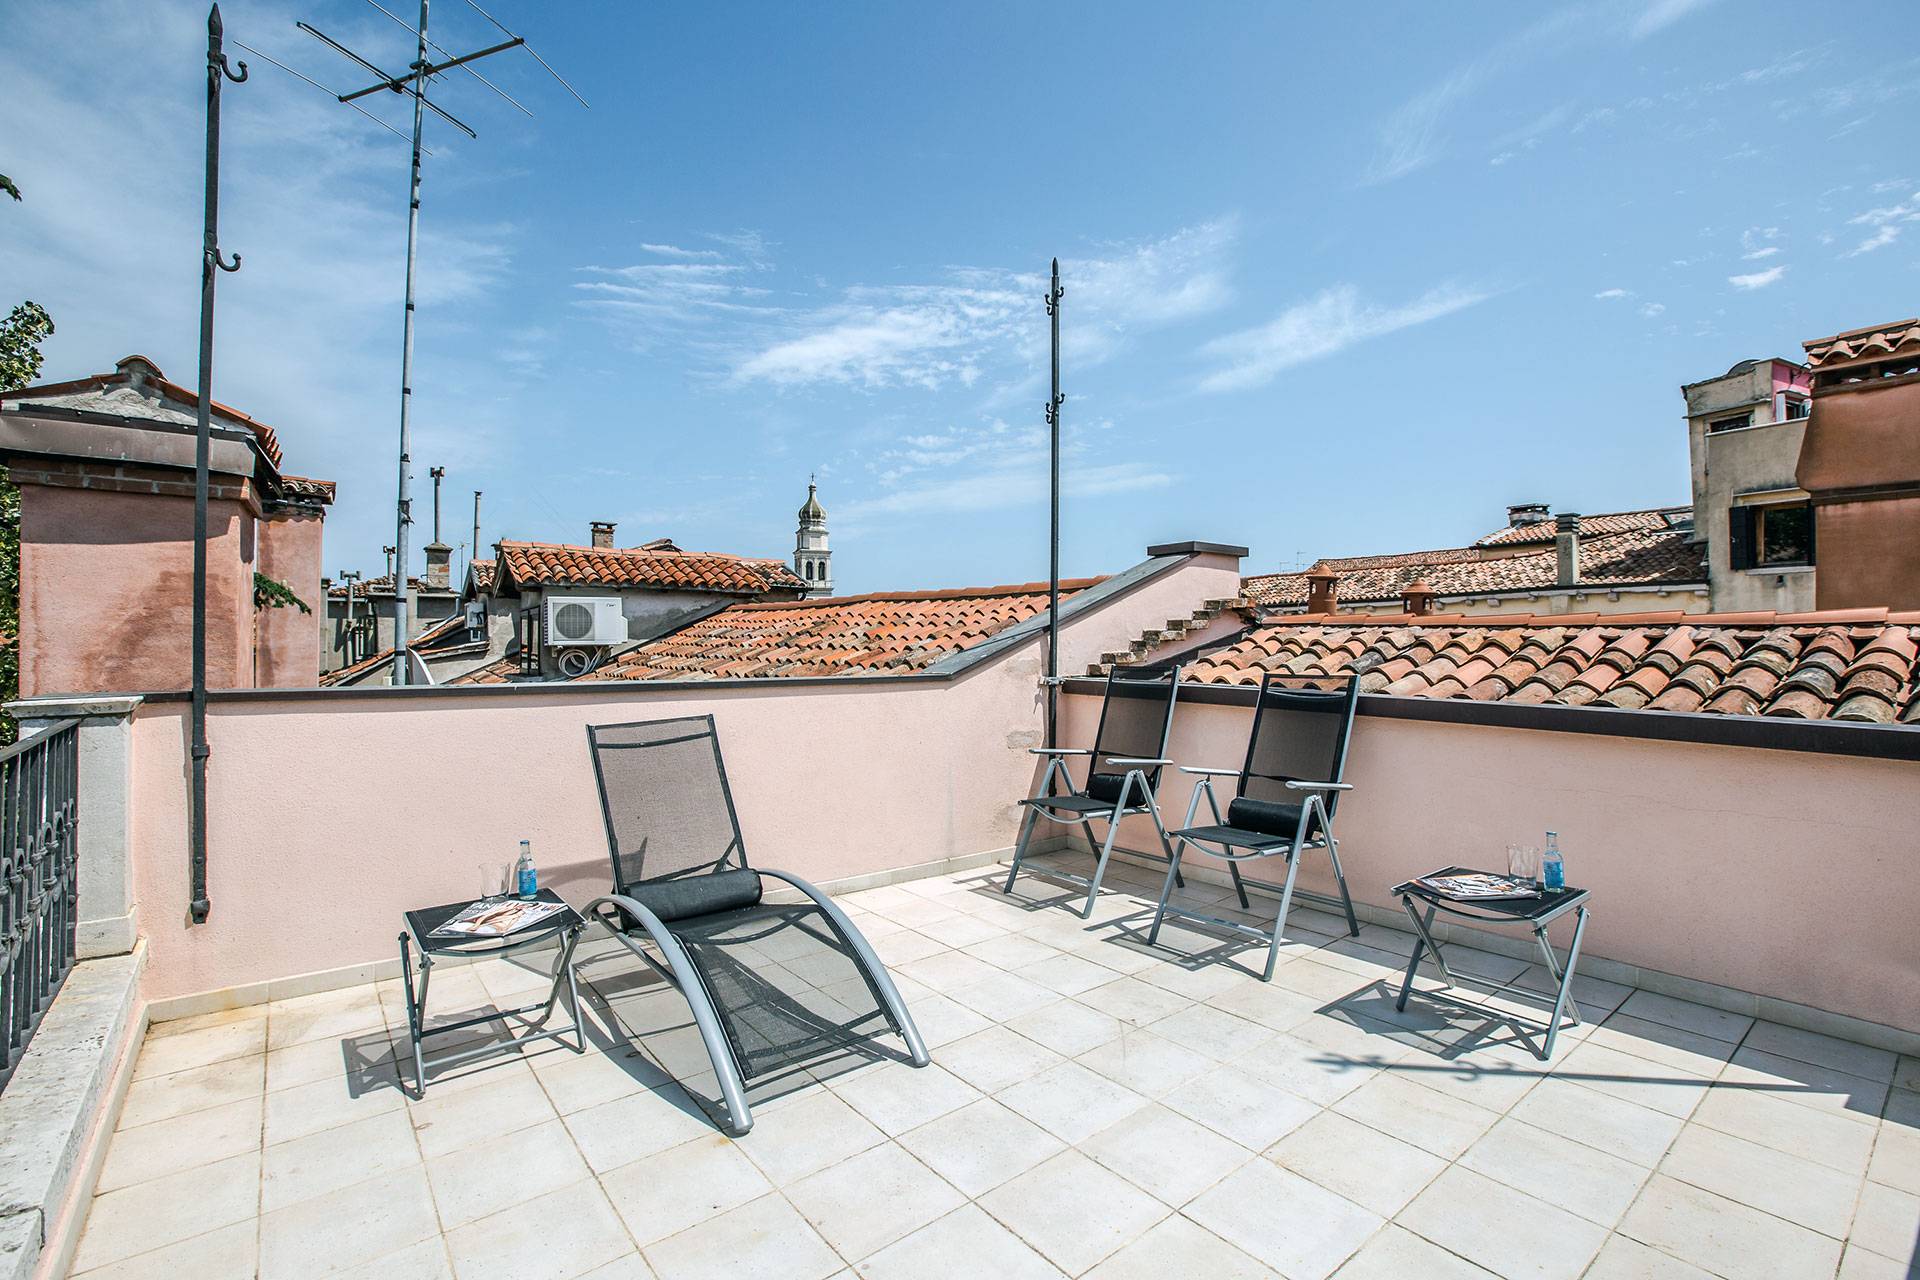 relax in the sun at the Alighieri Palace!